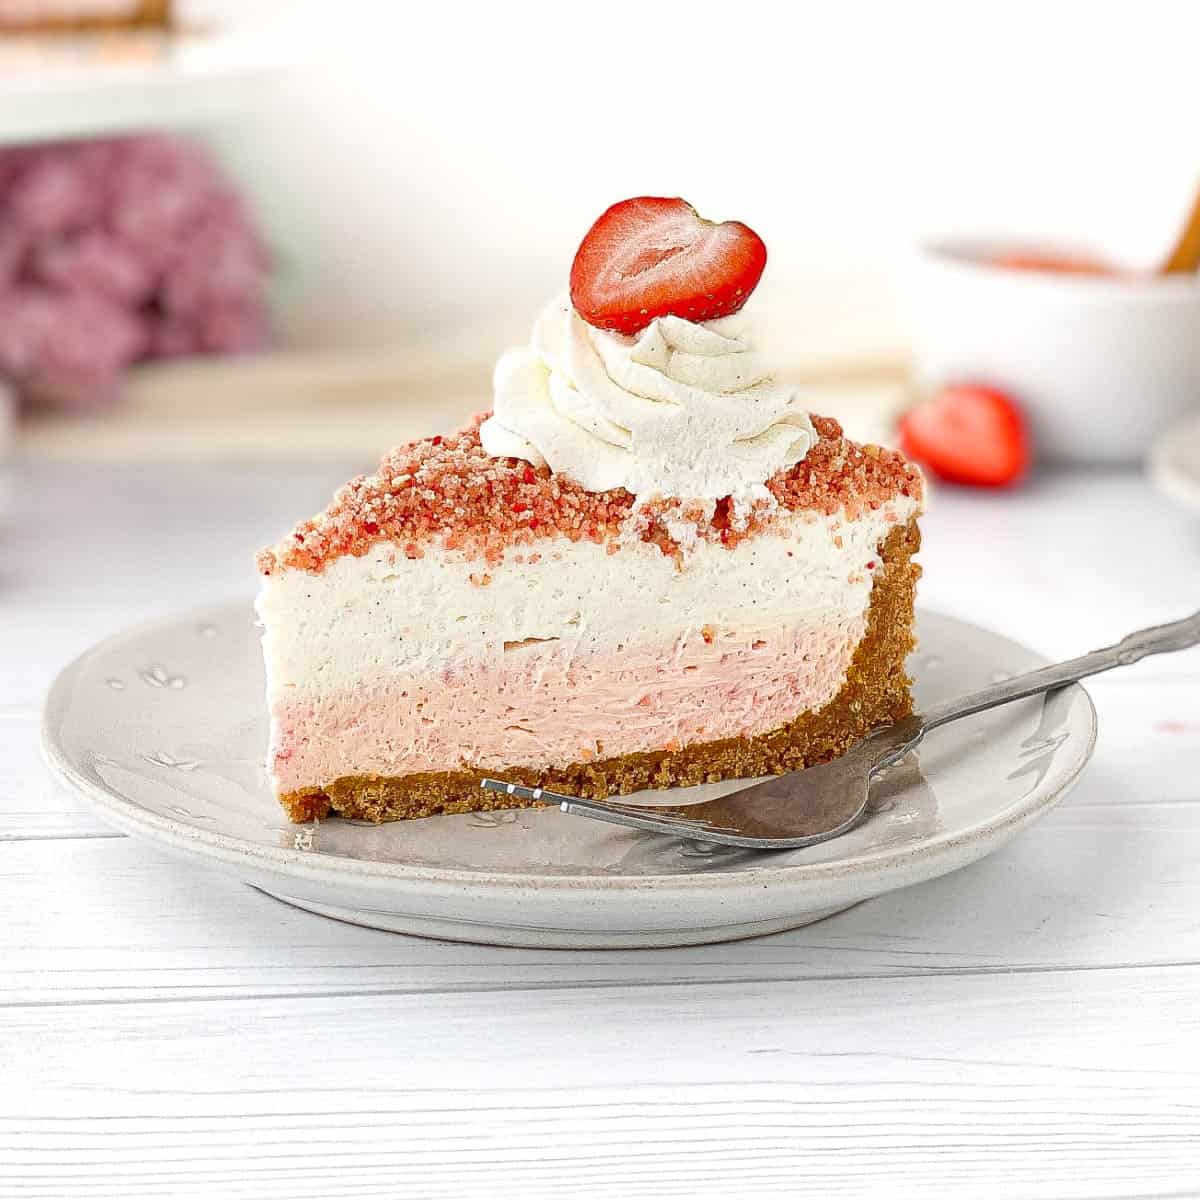 Slice of No Bake Strawberry Crunch Cheesecake on a white plate.